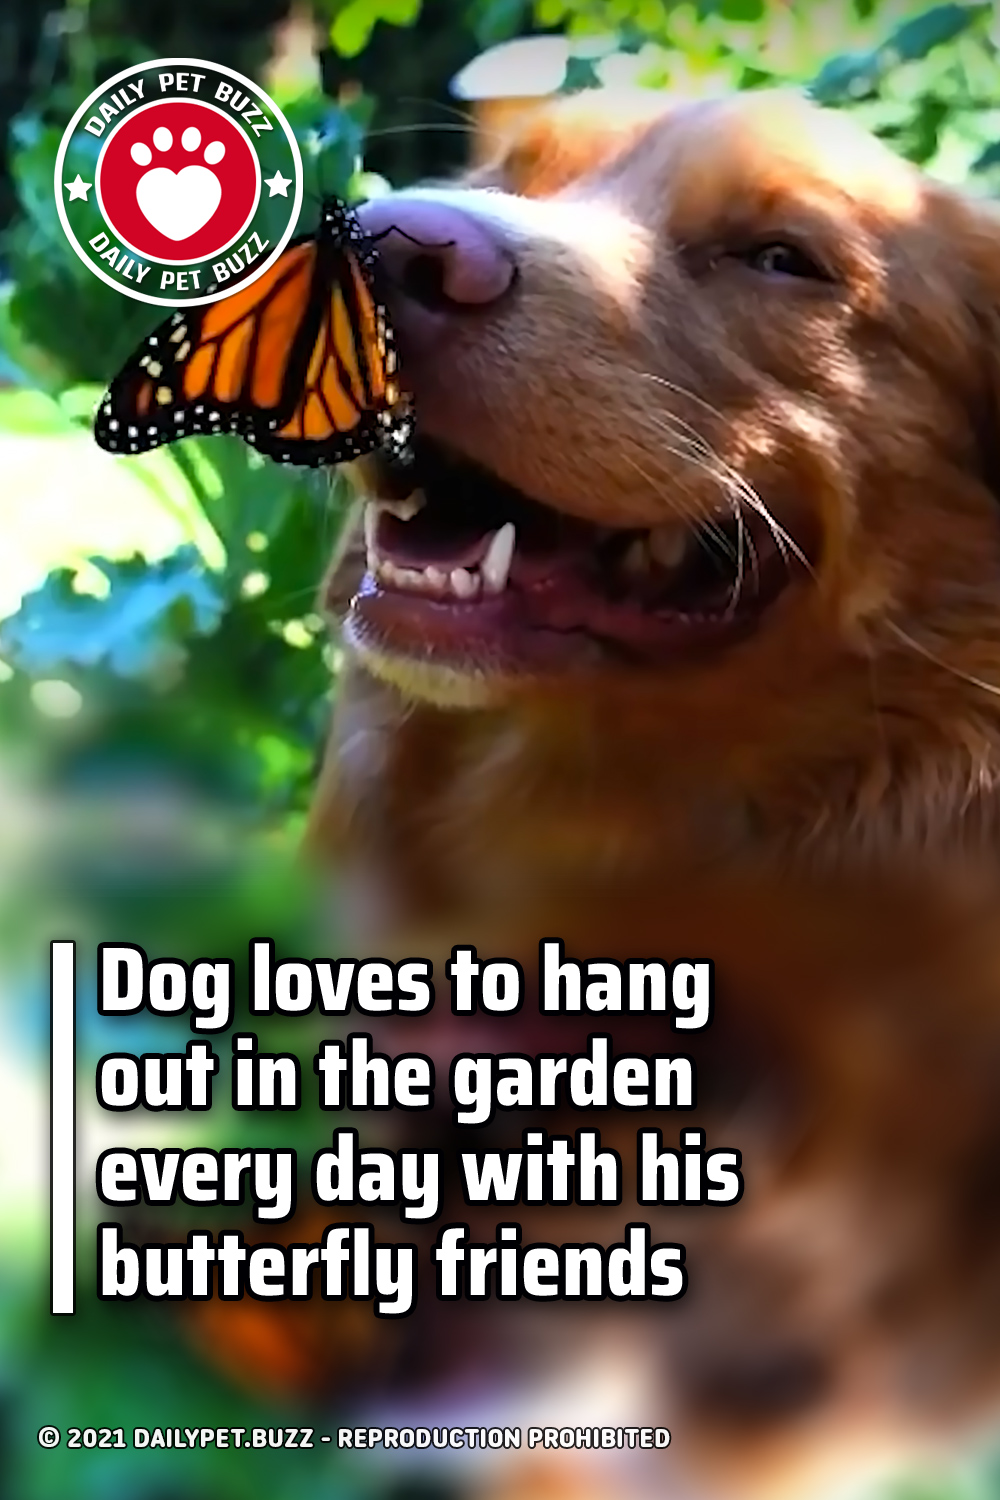 Dog loves to hang out in the garden every day with his butterfly friends